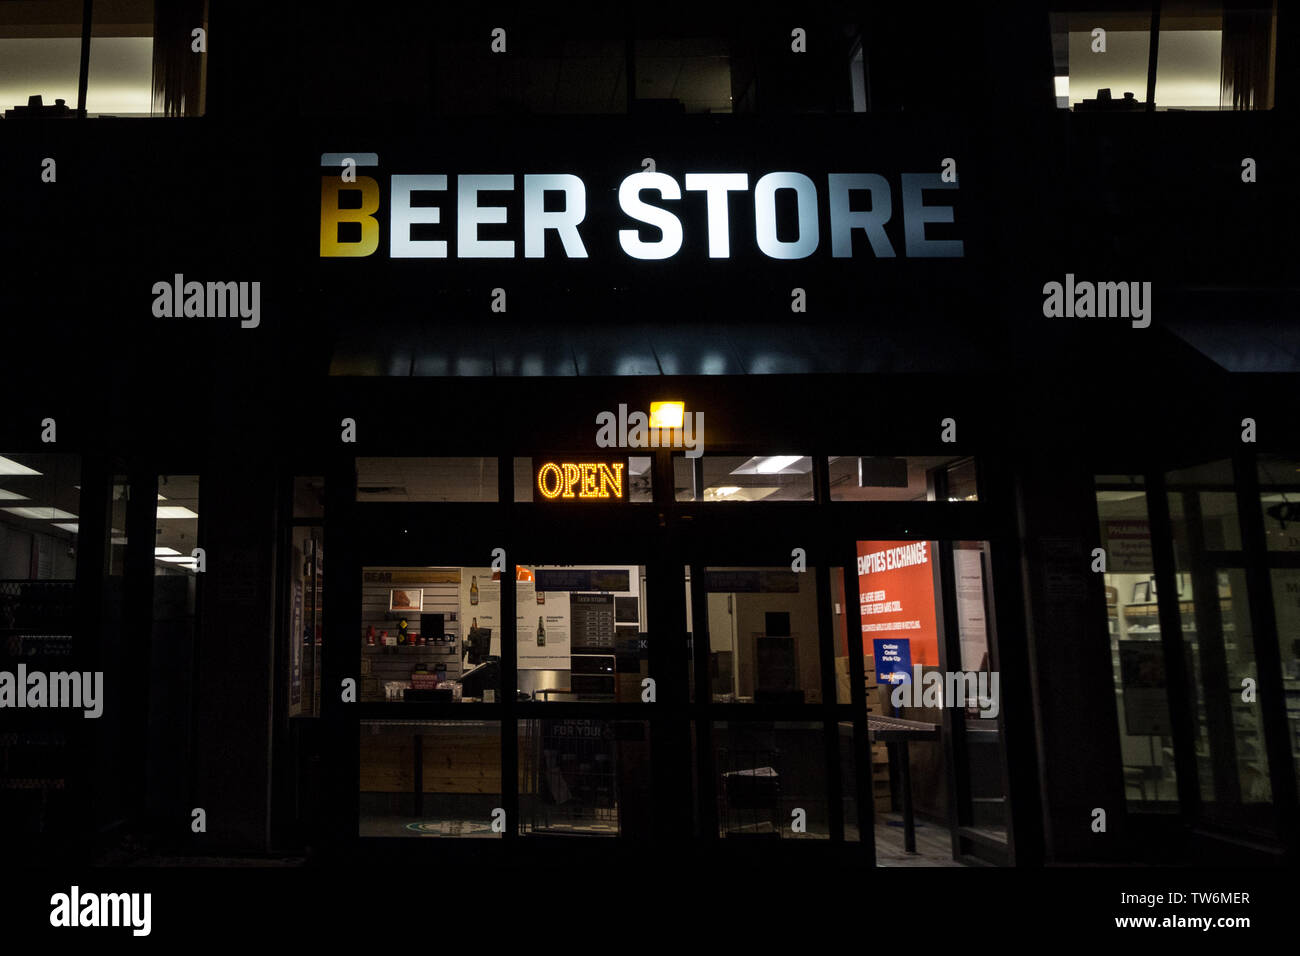 TORONTO, CANADA - NOVEMBER 14, 2018: Beer store logo on one of their shops in downtown Toronto, Ontario at night. Beer store is a chain of alcohol ret Stock Photo